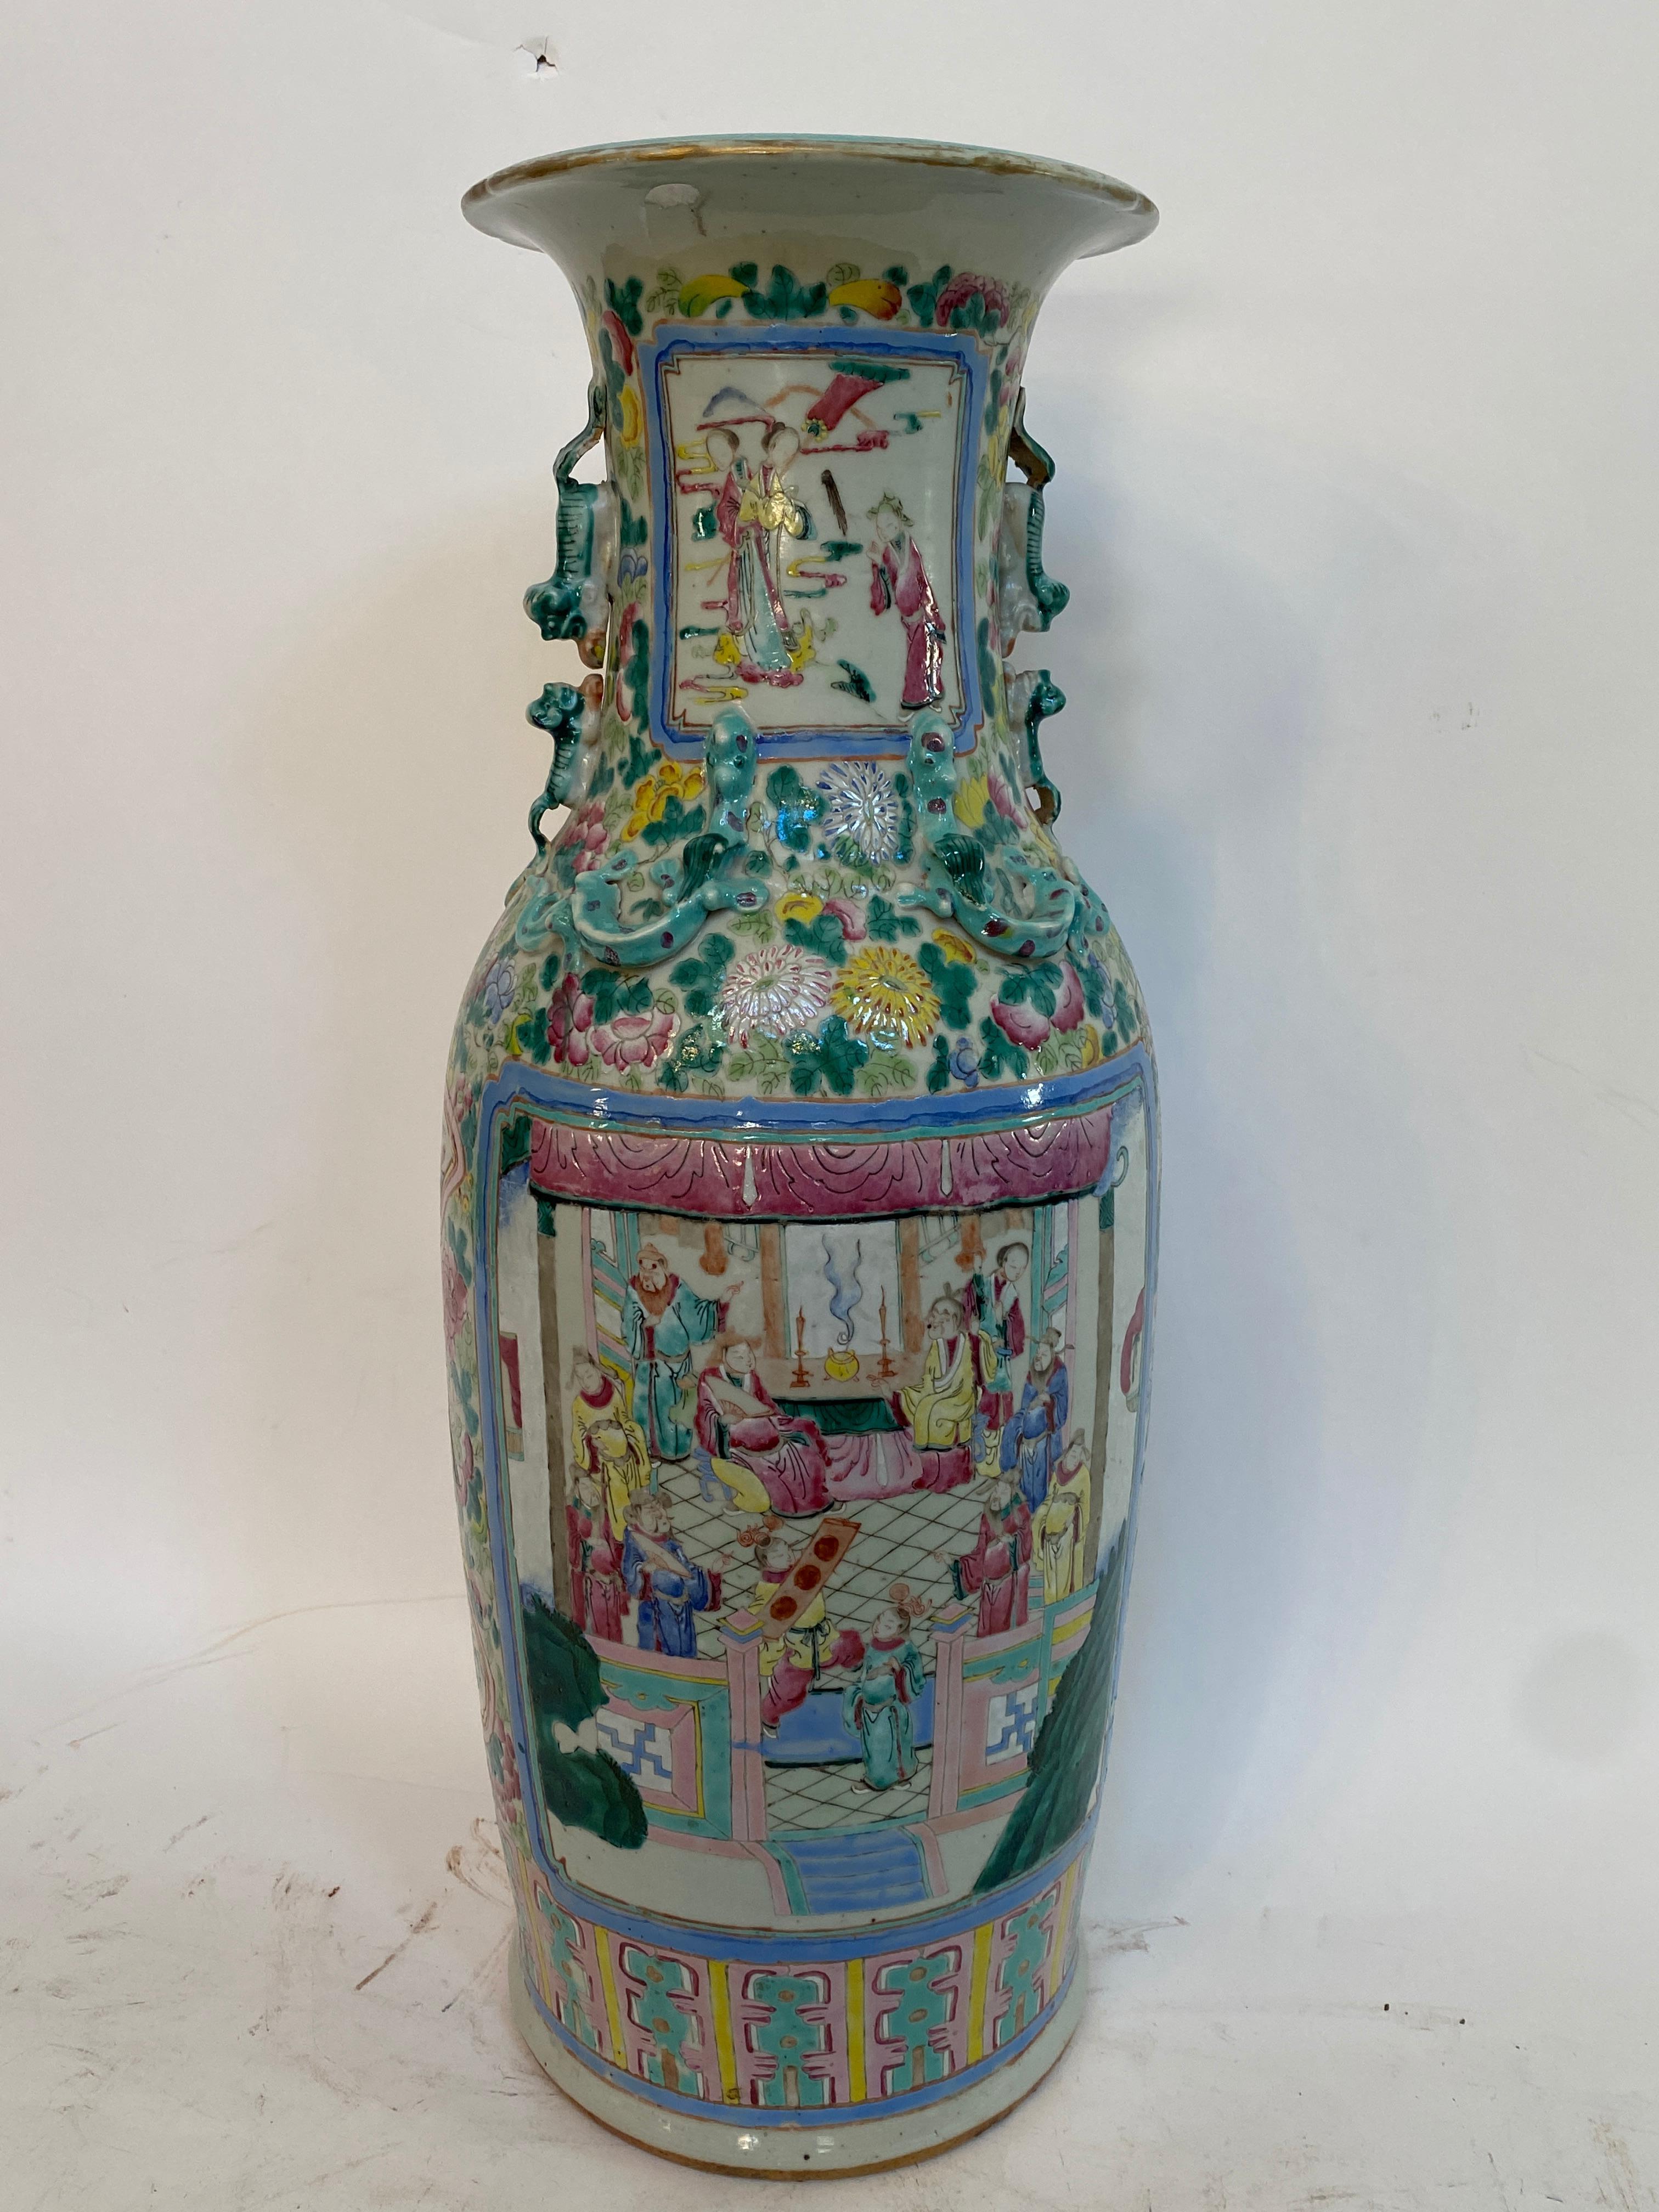 Qing Dynasty large 23.75” canton famille rose Chinese porcelain vase with two panels of figures and horses, the sides with birds and flowers double pairs of dogs handles and 2 pairs of facing dragons applied, overall 24” height x 9.5” diameter, see